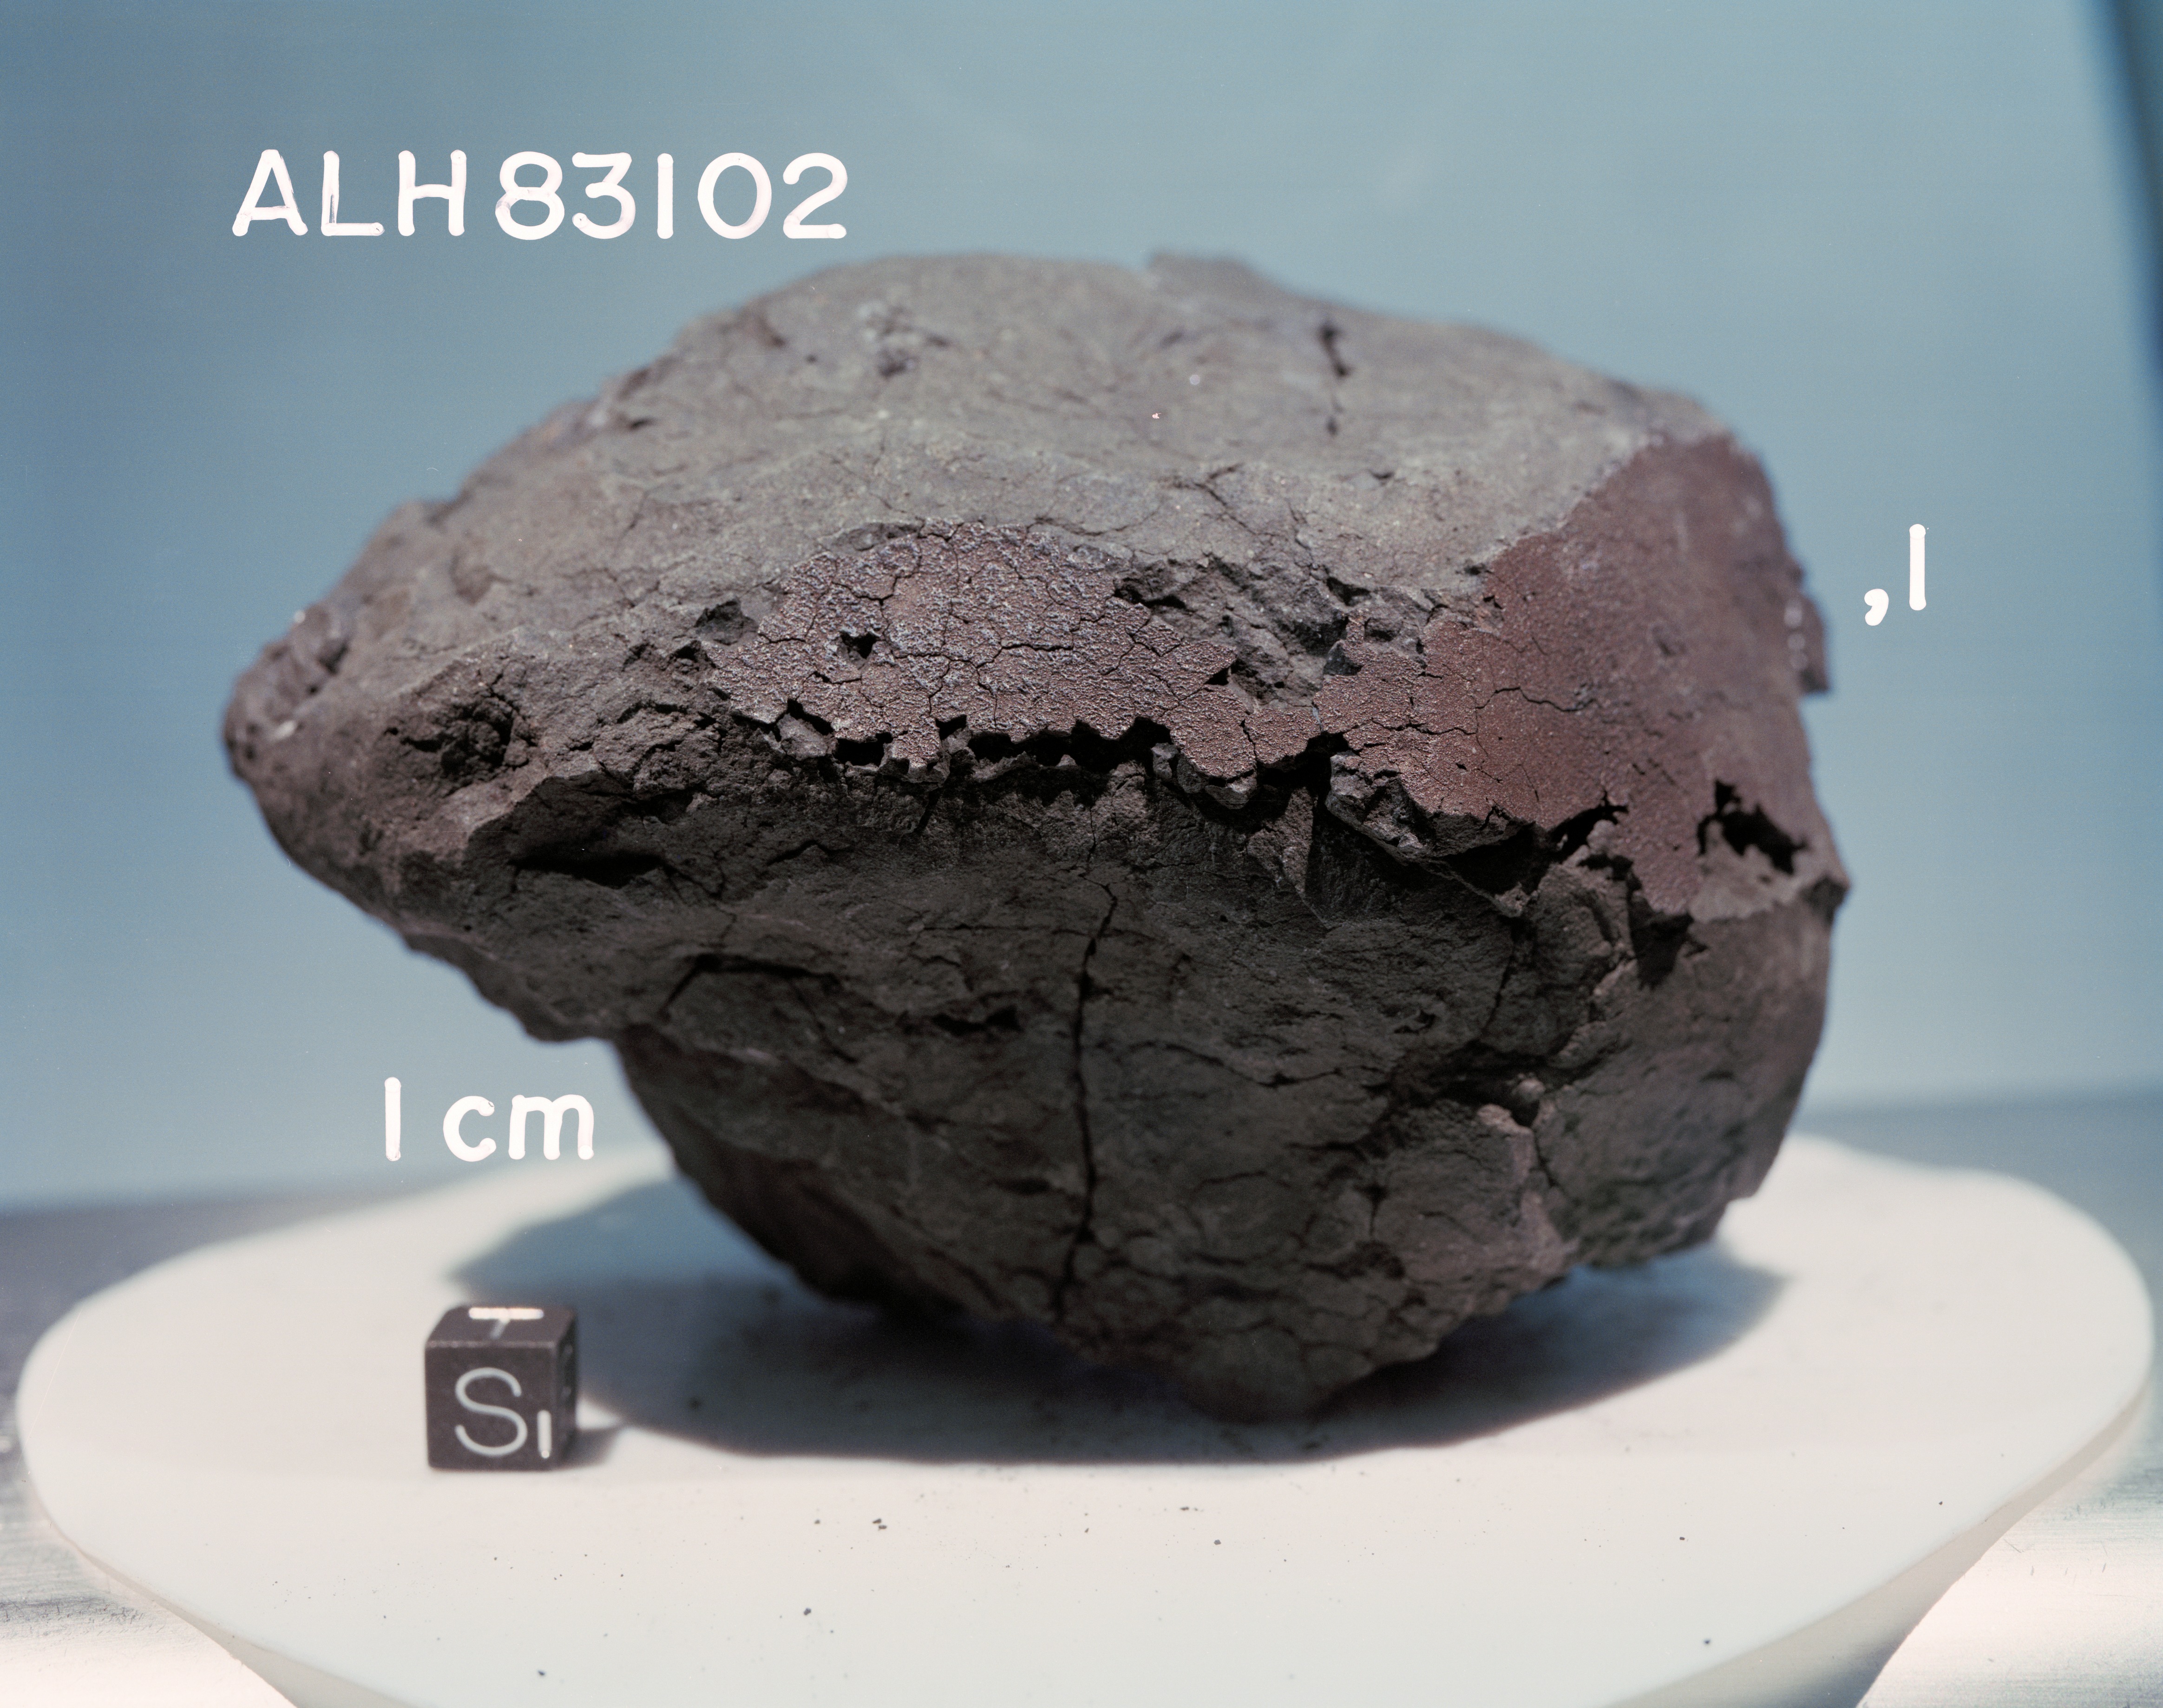 A5, Lab Photo of Sample ALH 83102 (Photo Number s84-36020)